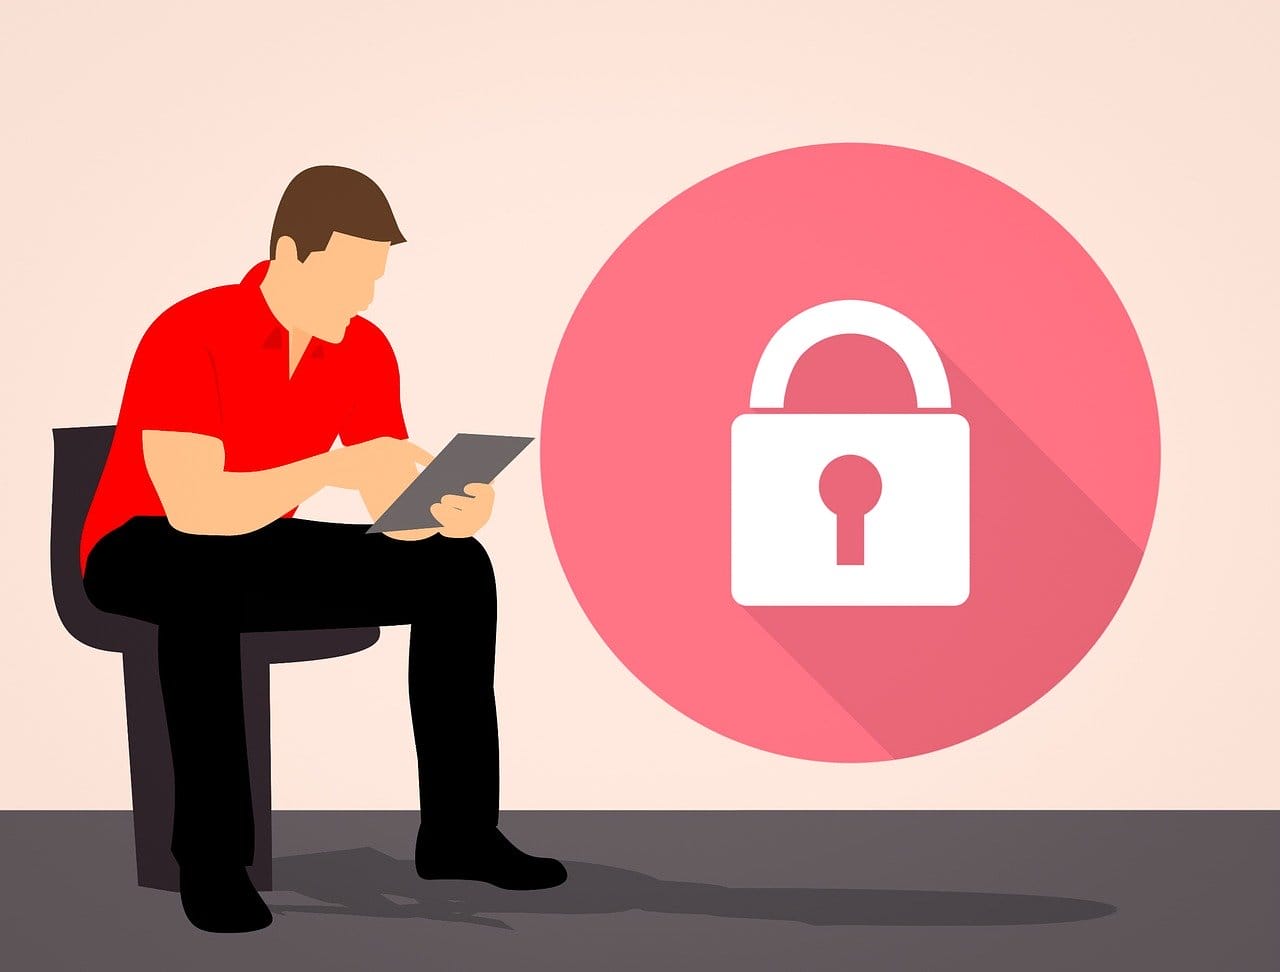 Keysotres are vital to mobile security; it stores sensitive cryptographic data, such as private keys and certificates, to ensure secure communication and authentication.